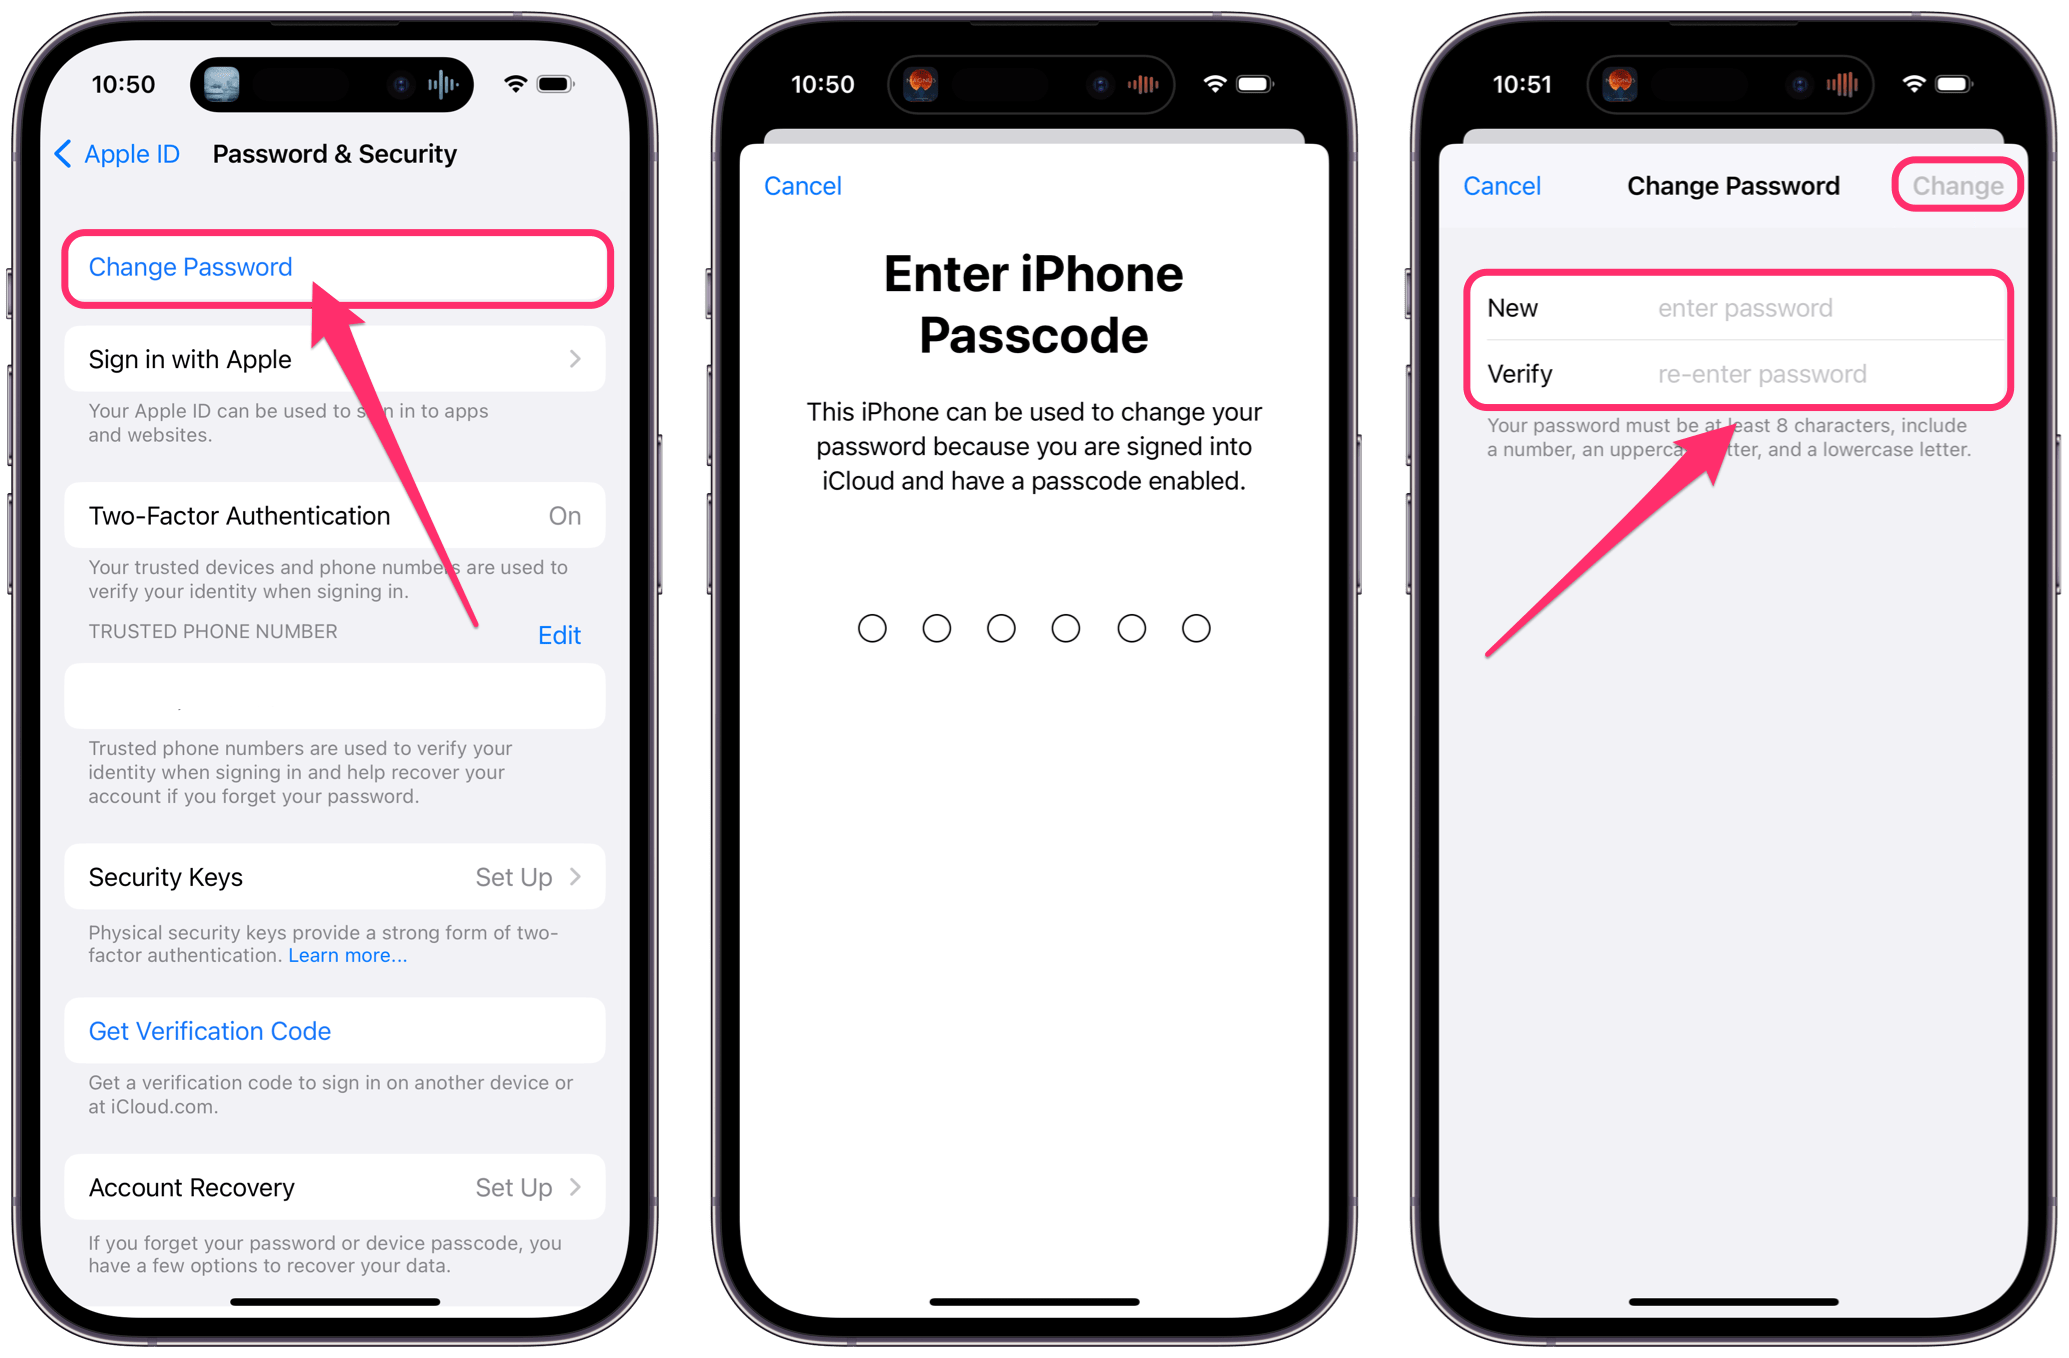 change password for Apple ID in settings oniphone